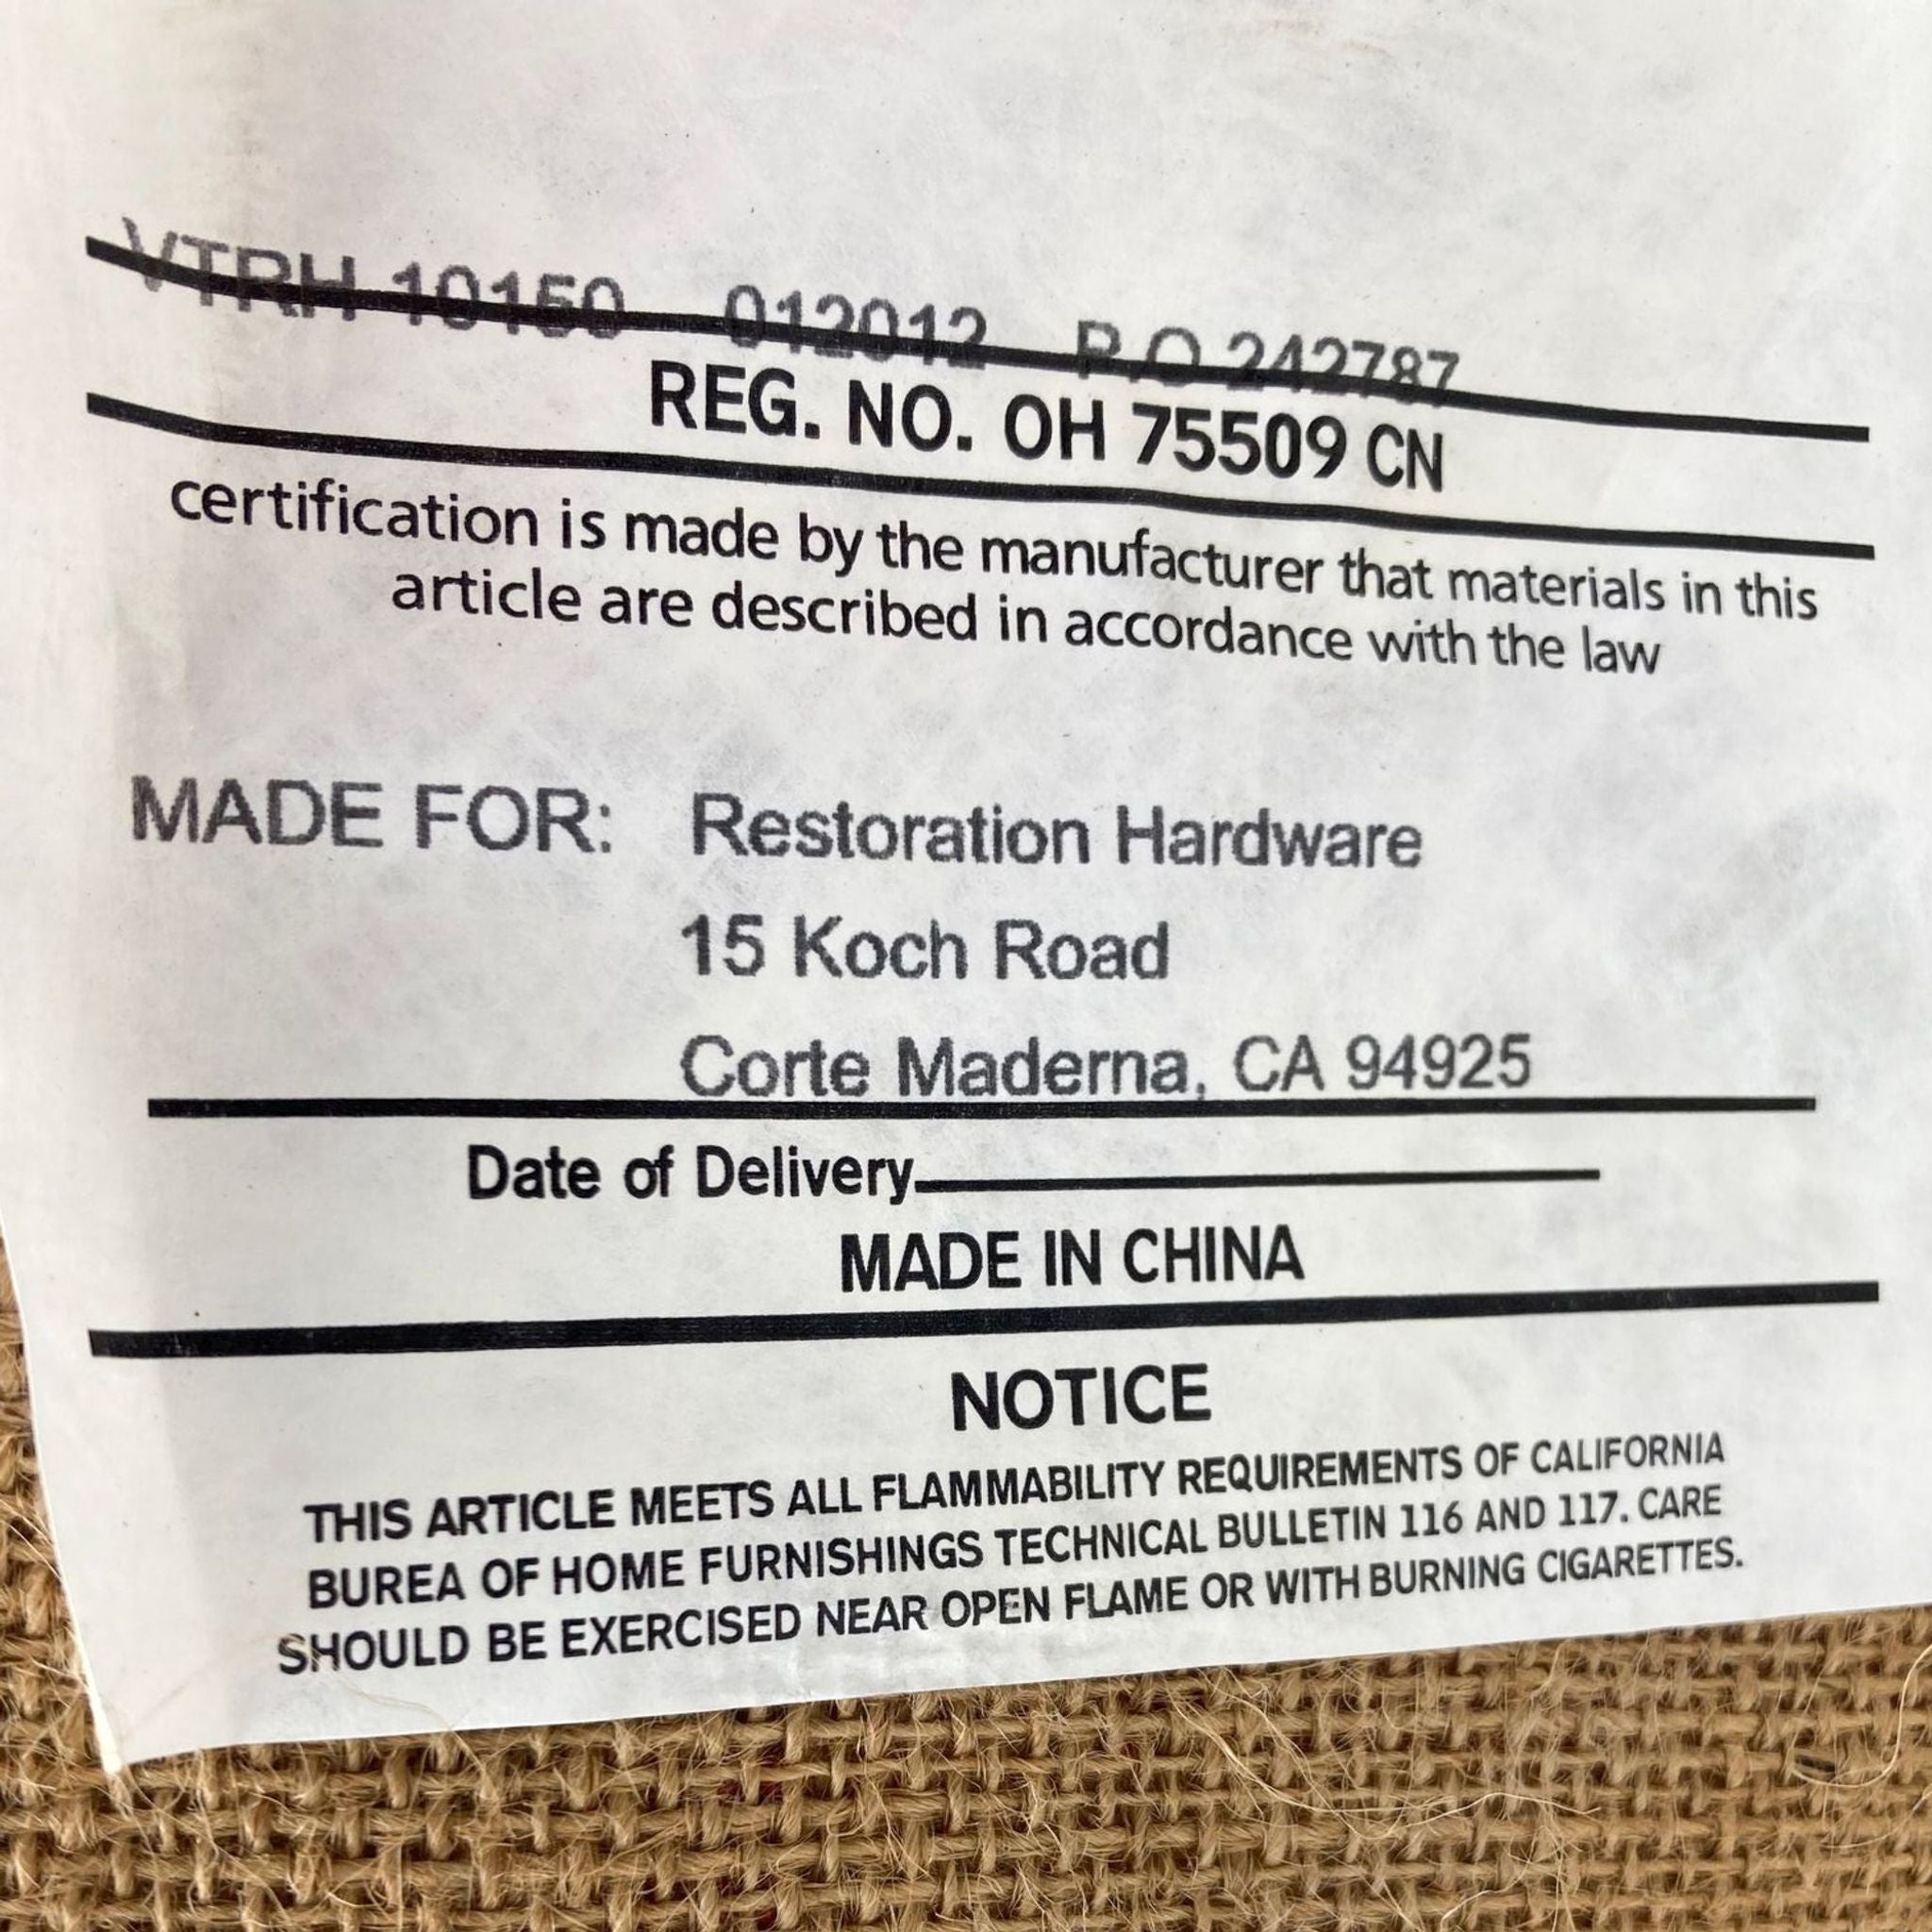 2. Close-up of the label for a Restoration Hardware lounge item showing the product meets safety standards.